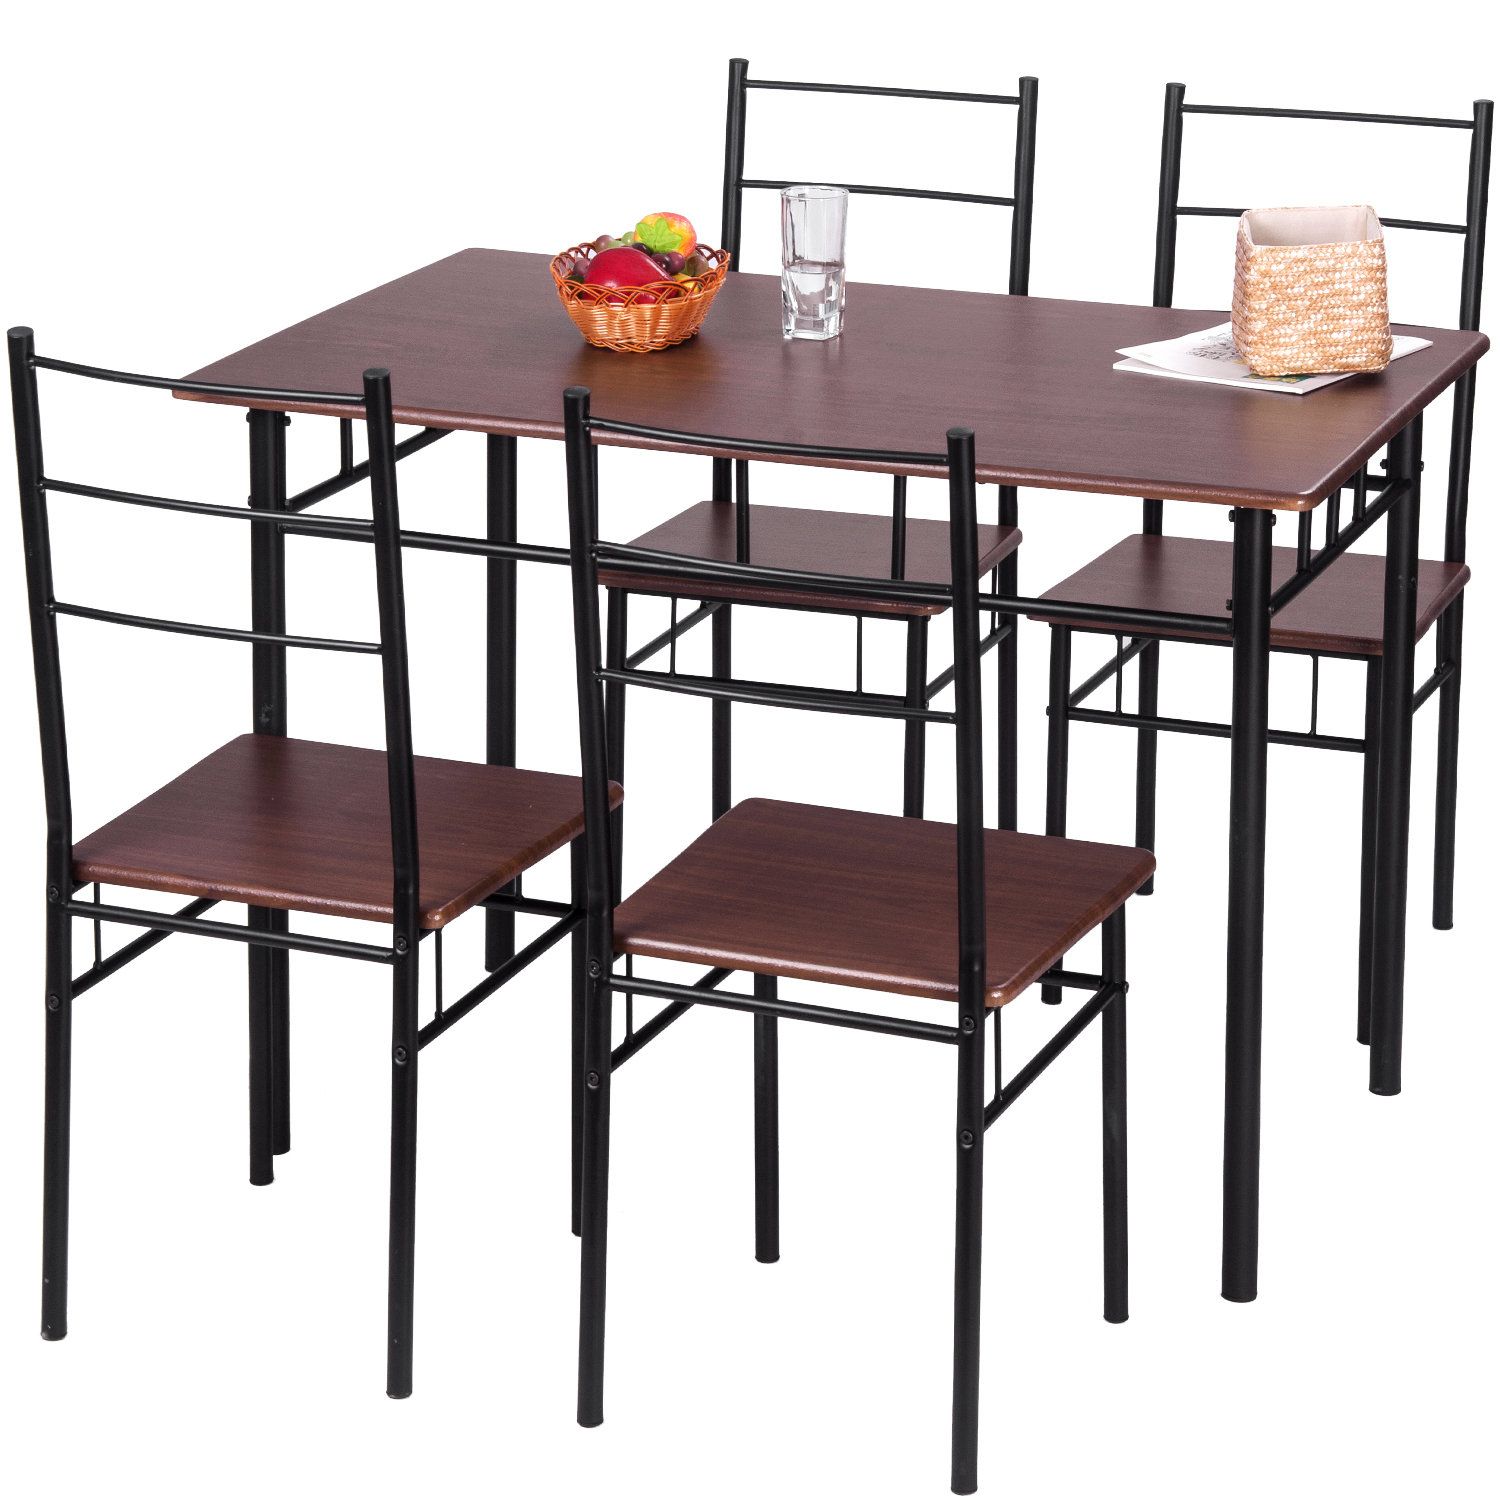 Most Recently Released Liles 5 Piece Breakfast Nook Dining Sets With Regard To Merax 5 Piece Breakfast Nook Dining Set & Reviews (Photo 6 of 20)